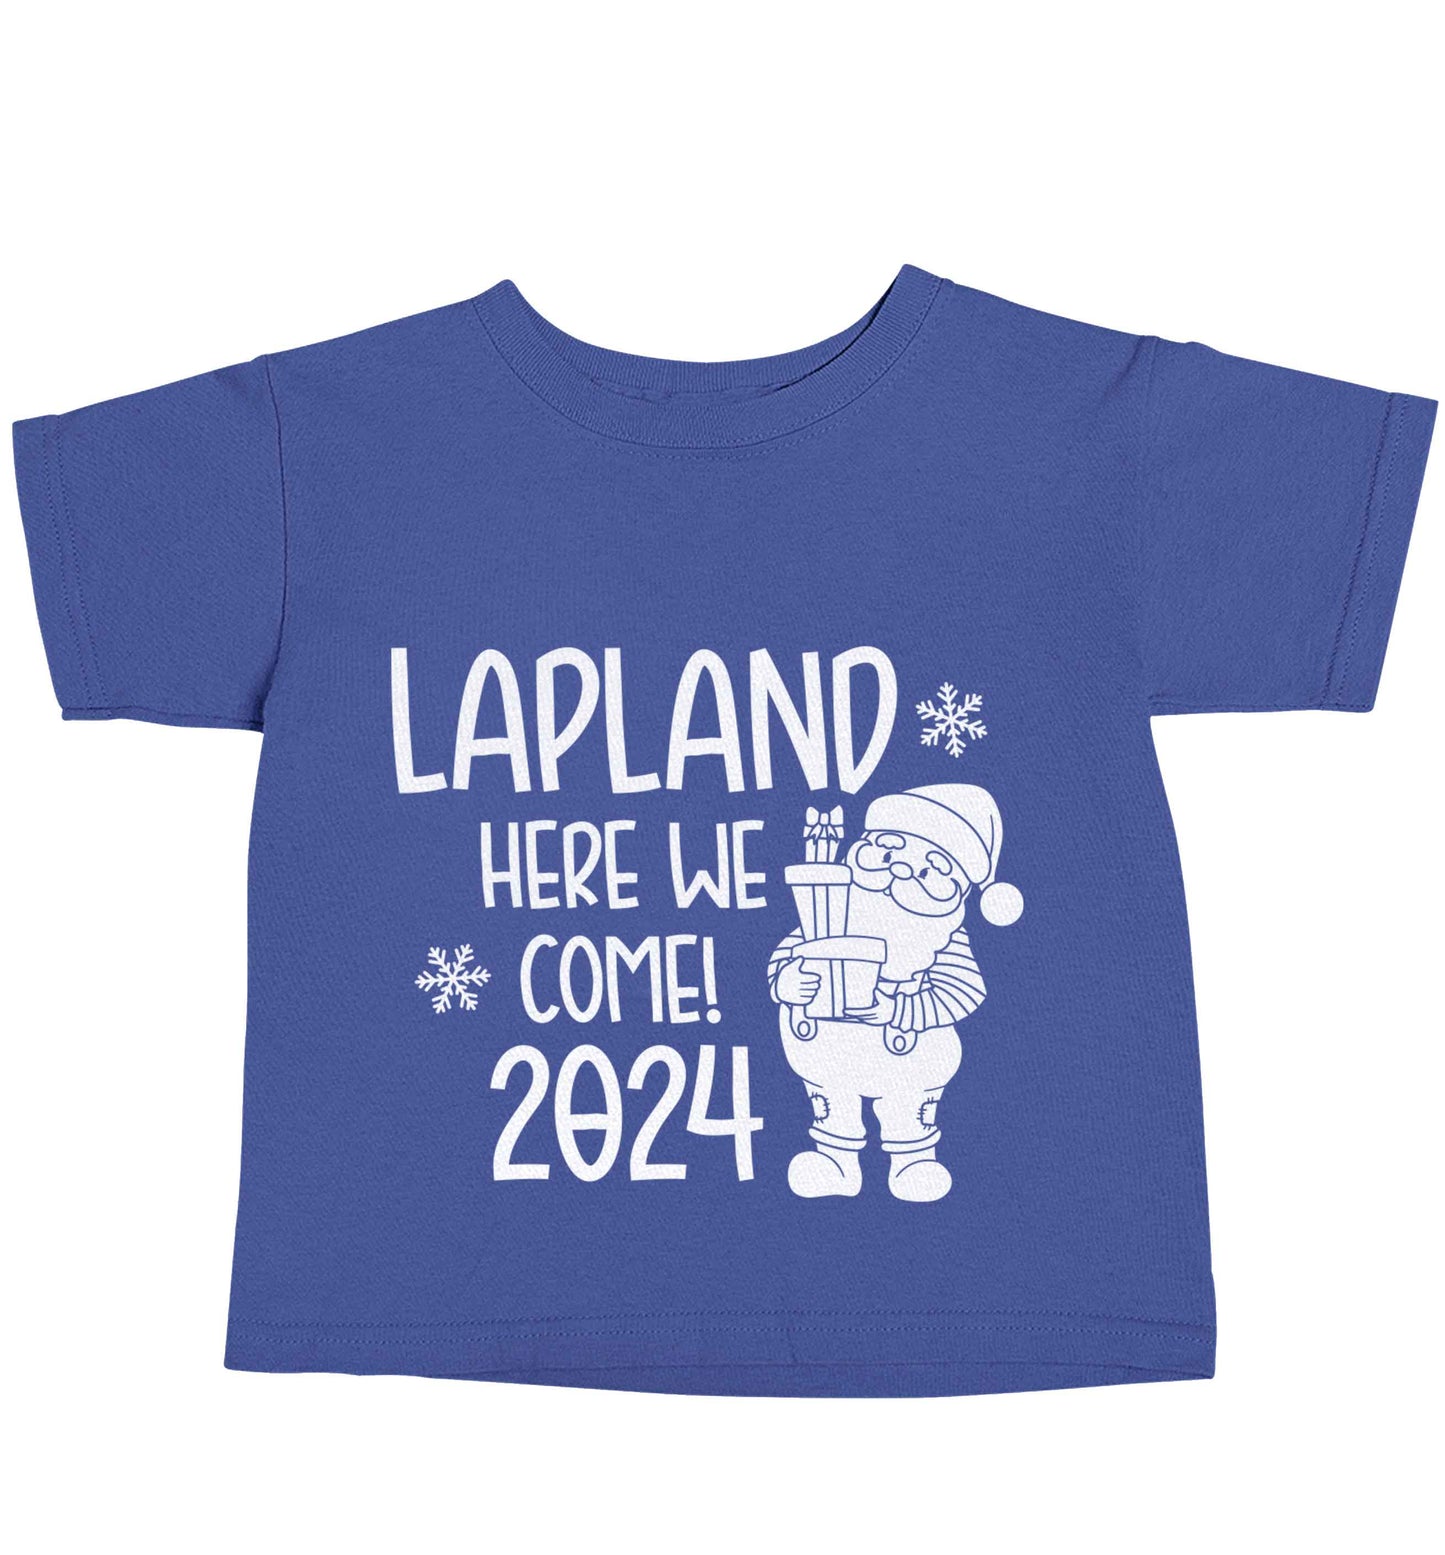 Lapland here we come blue baby toddler Tshirt 2 Years